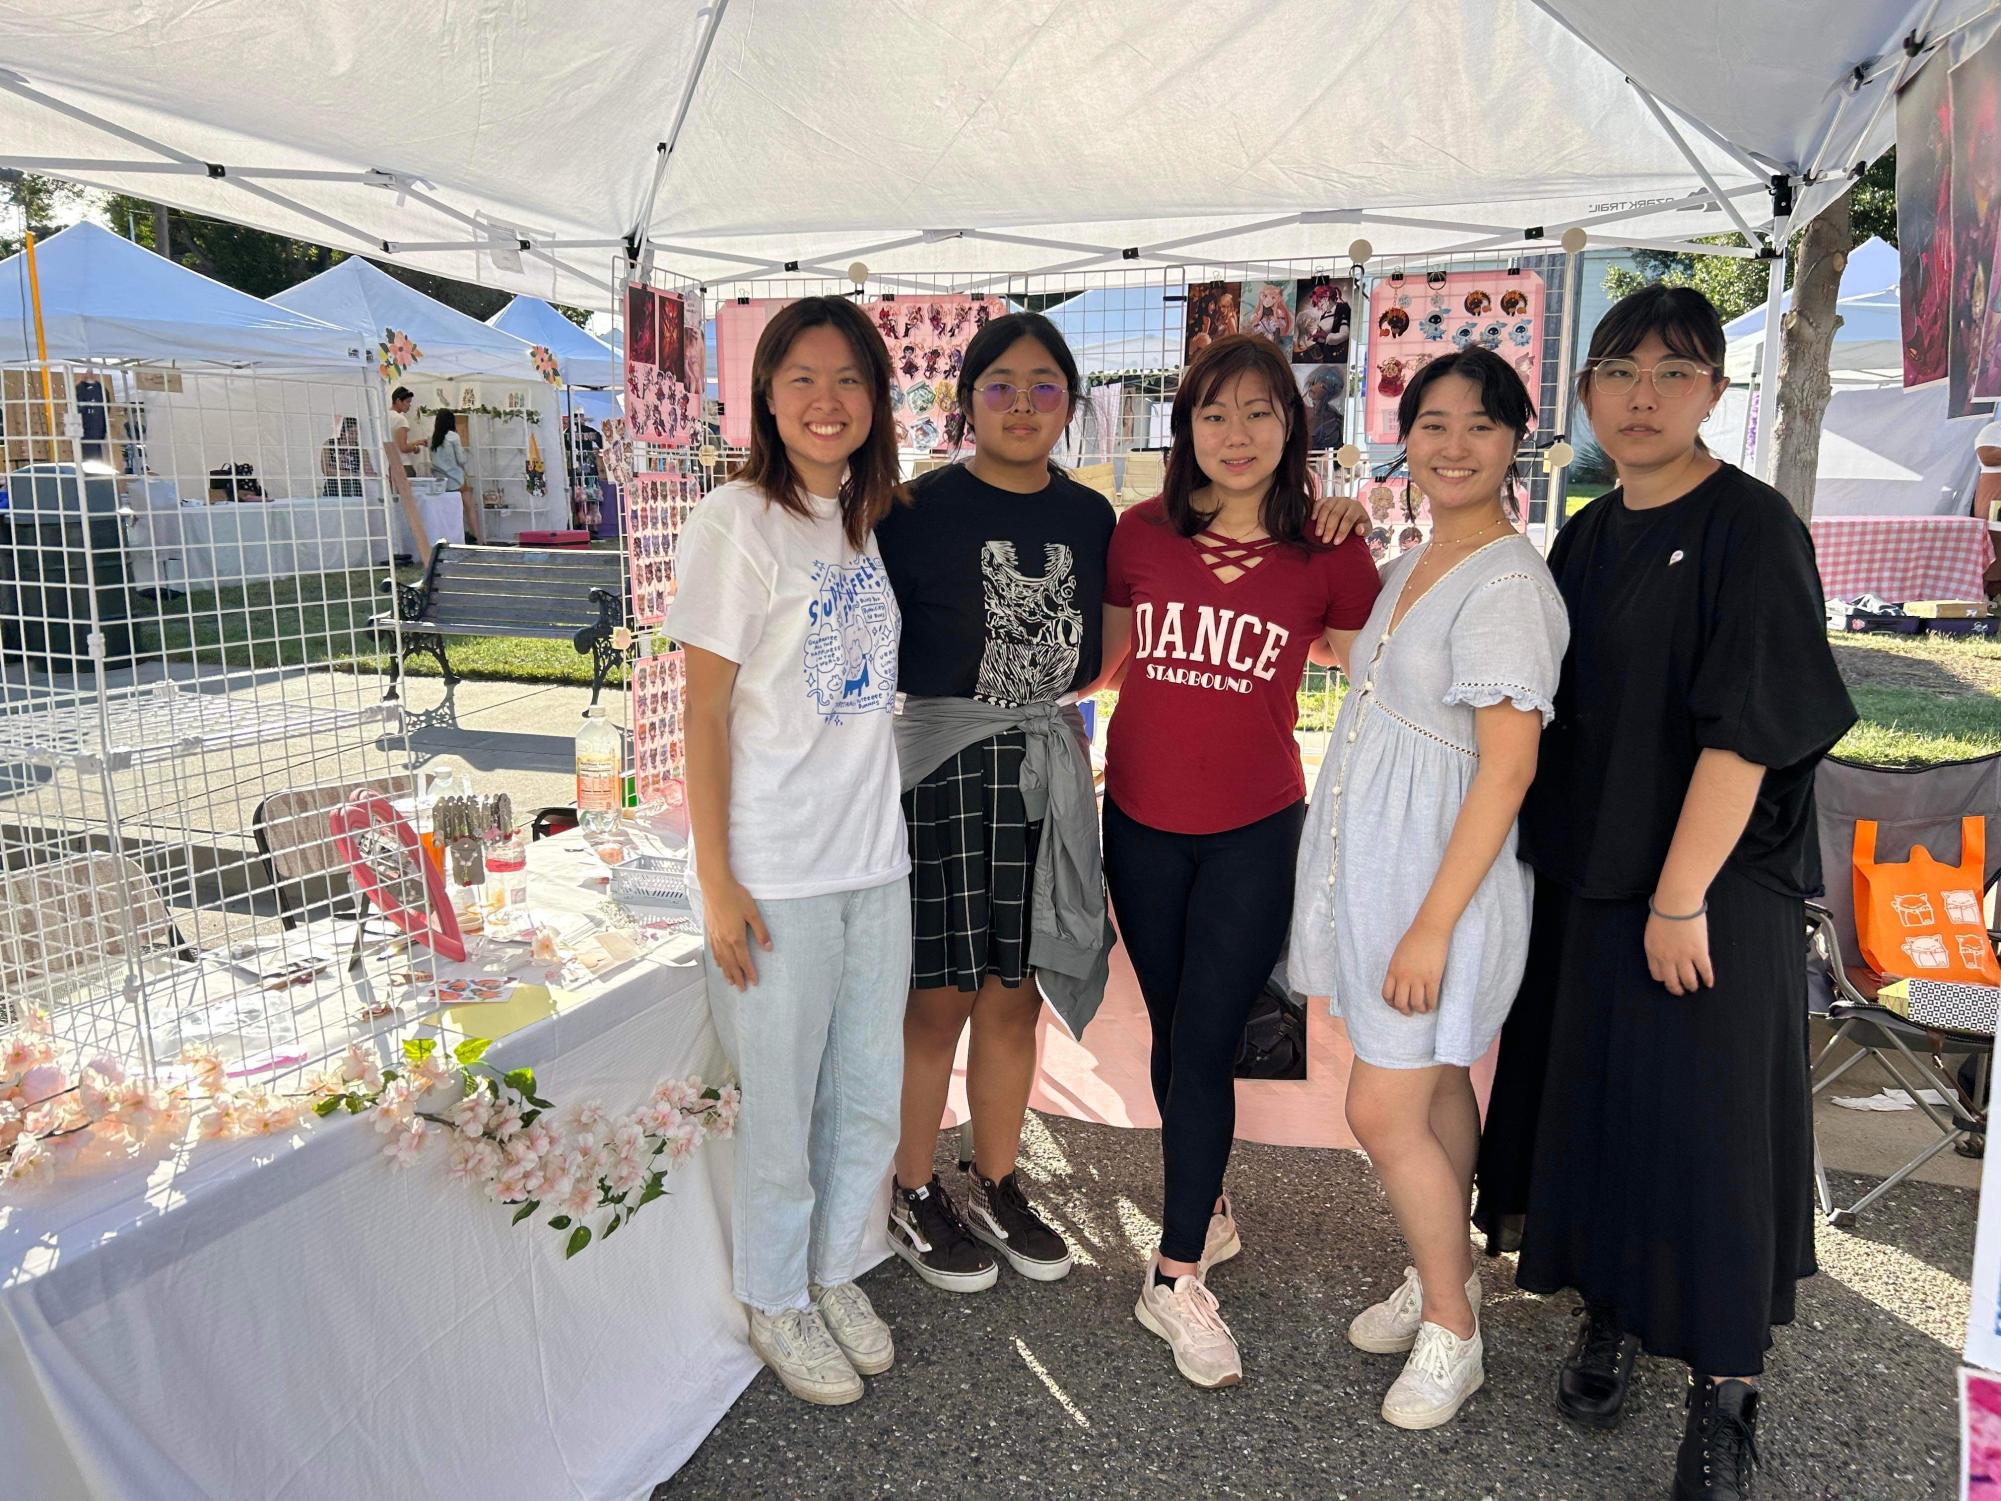 Katie Chung finds vending at craft fairs with friends and running her small business to be a gratifying experience, and she feels lucky that she gets to share her art with new people.